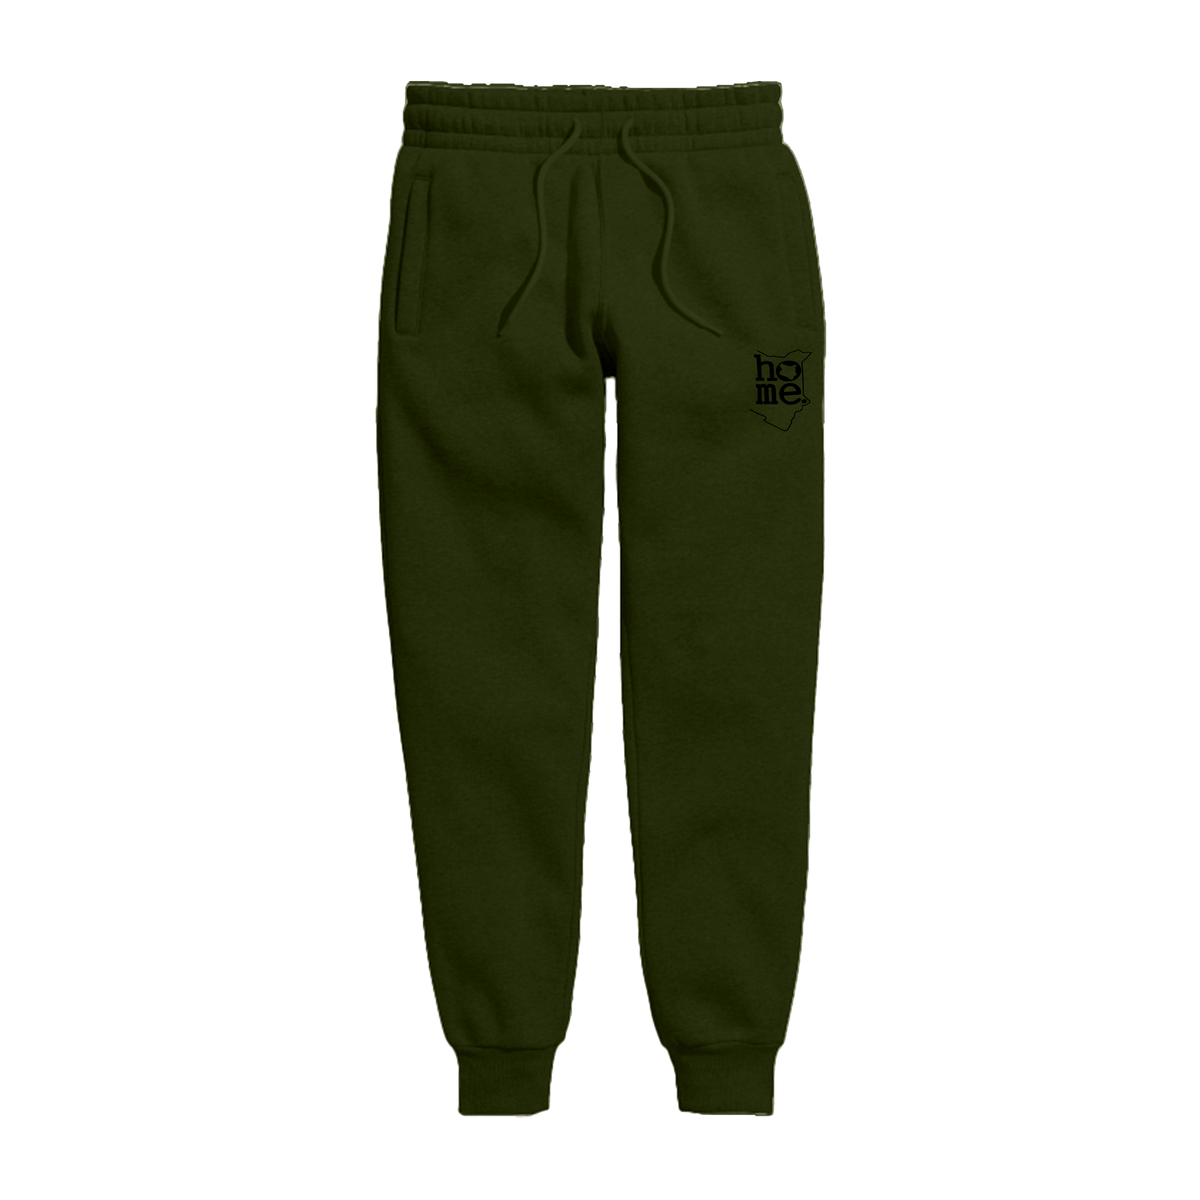 home_254 KIDS SWEATPANTS PICTURE FOR JUNGLE GREEN IN HEAVY FABRIC WITH BLACK CLASSIC PRINT